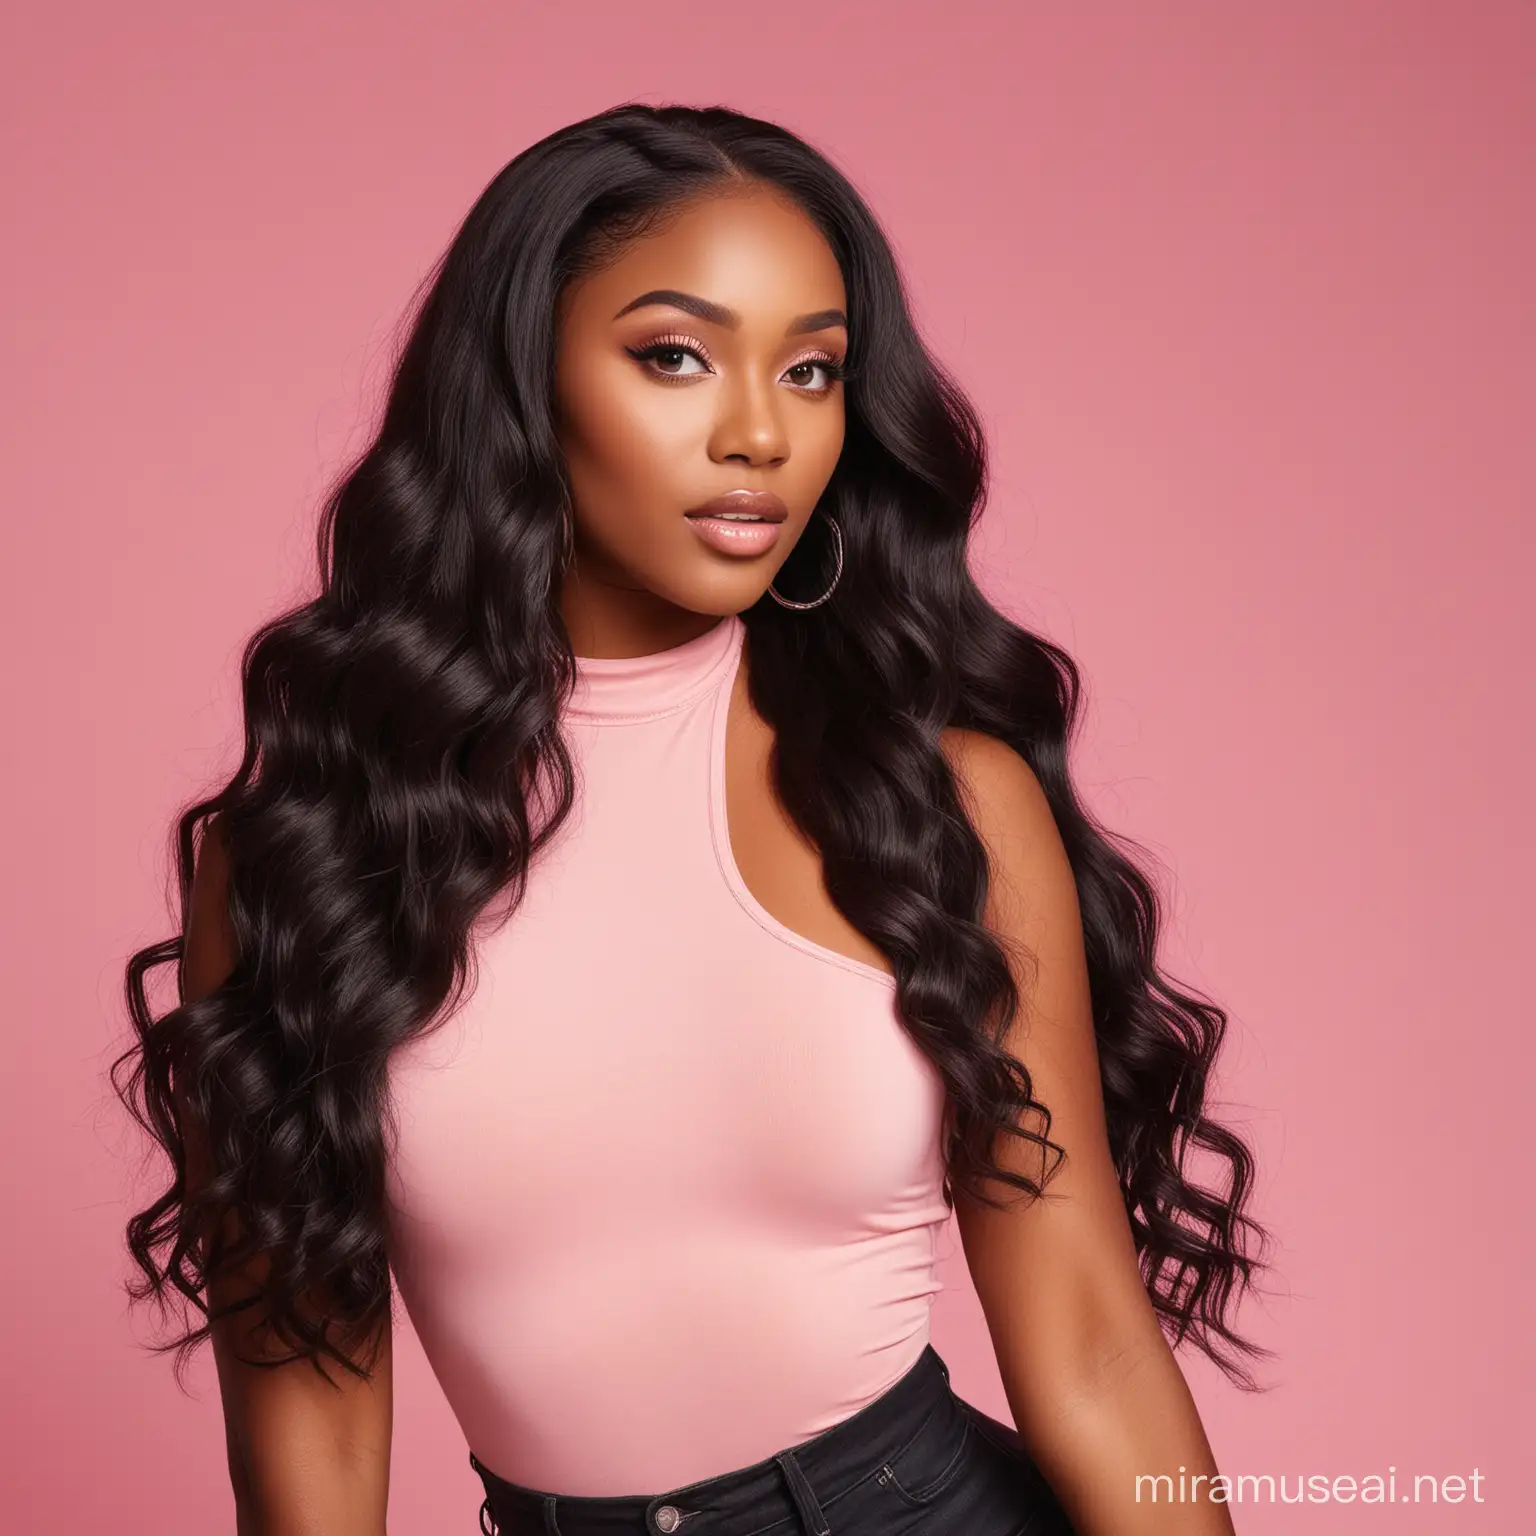 Stunning Black Model with Long Body Wave Hair Extensions in Professional Hair Brand Photoshoot